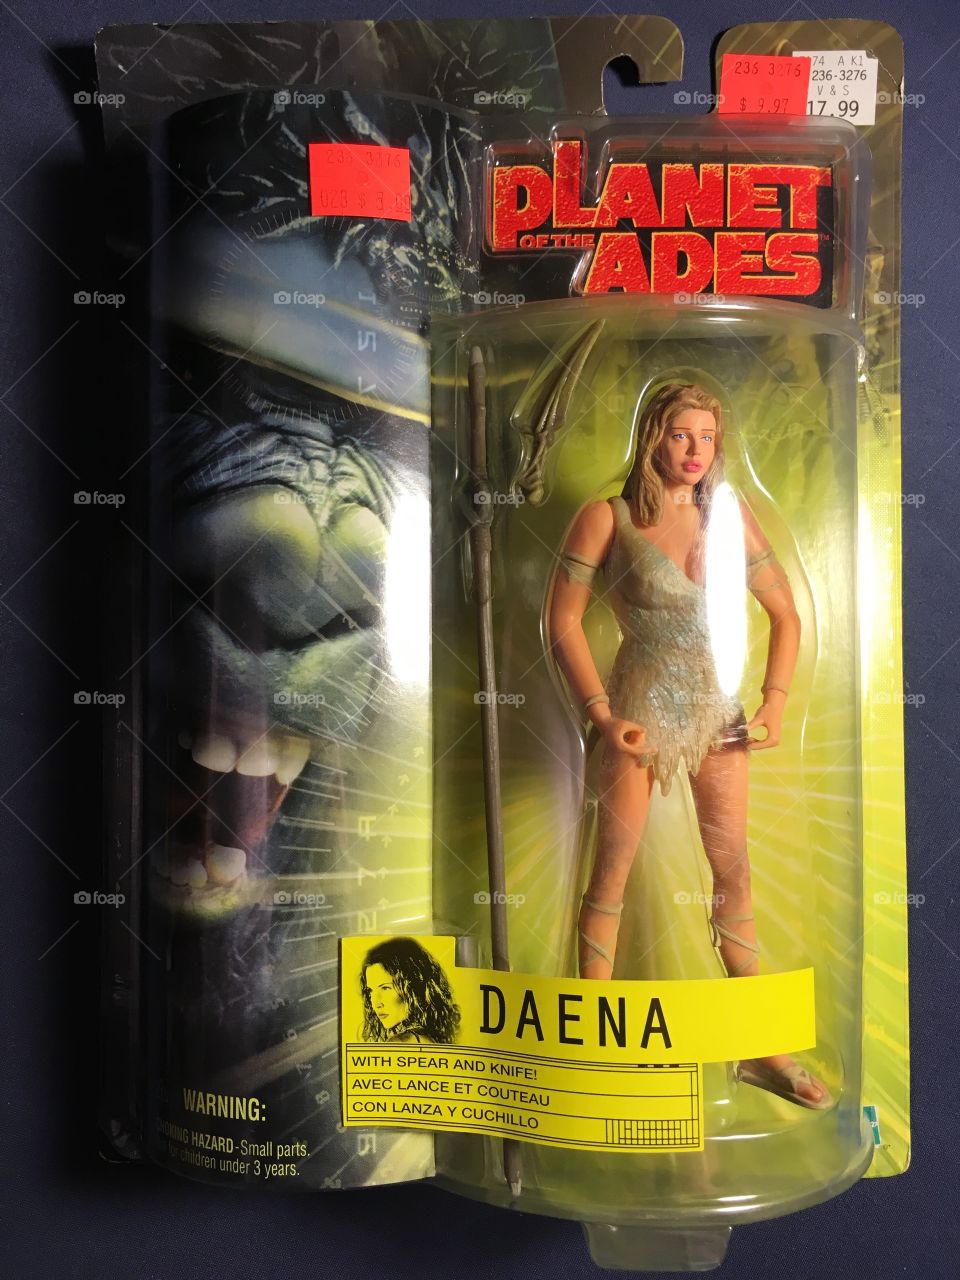 Daena - Planet of the Apes - Action Figure 
Released - 2001